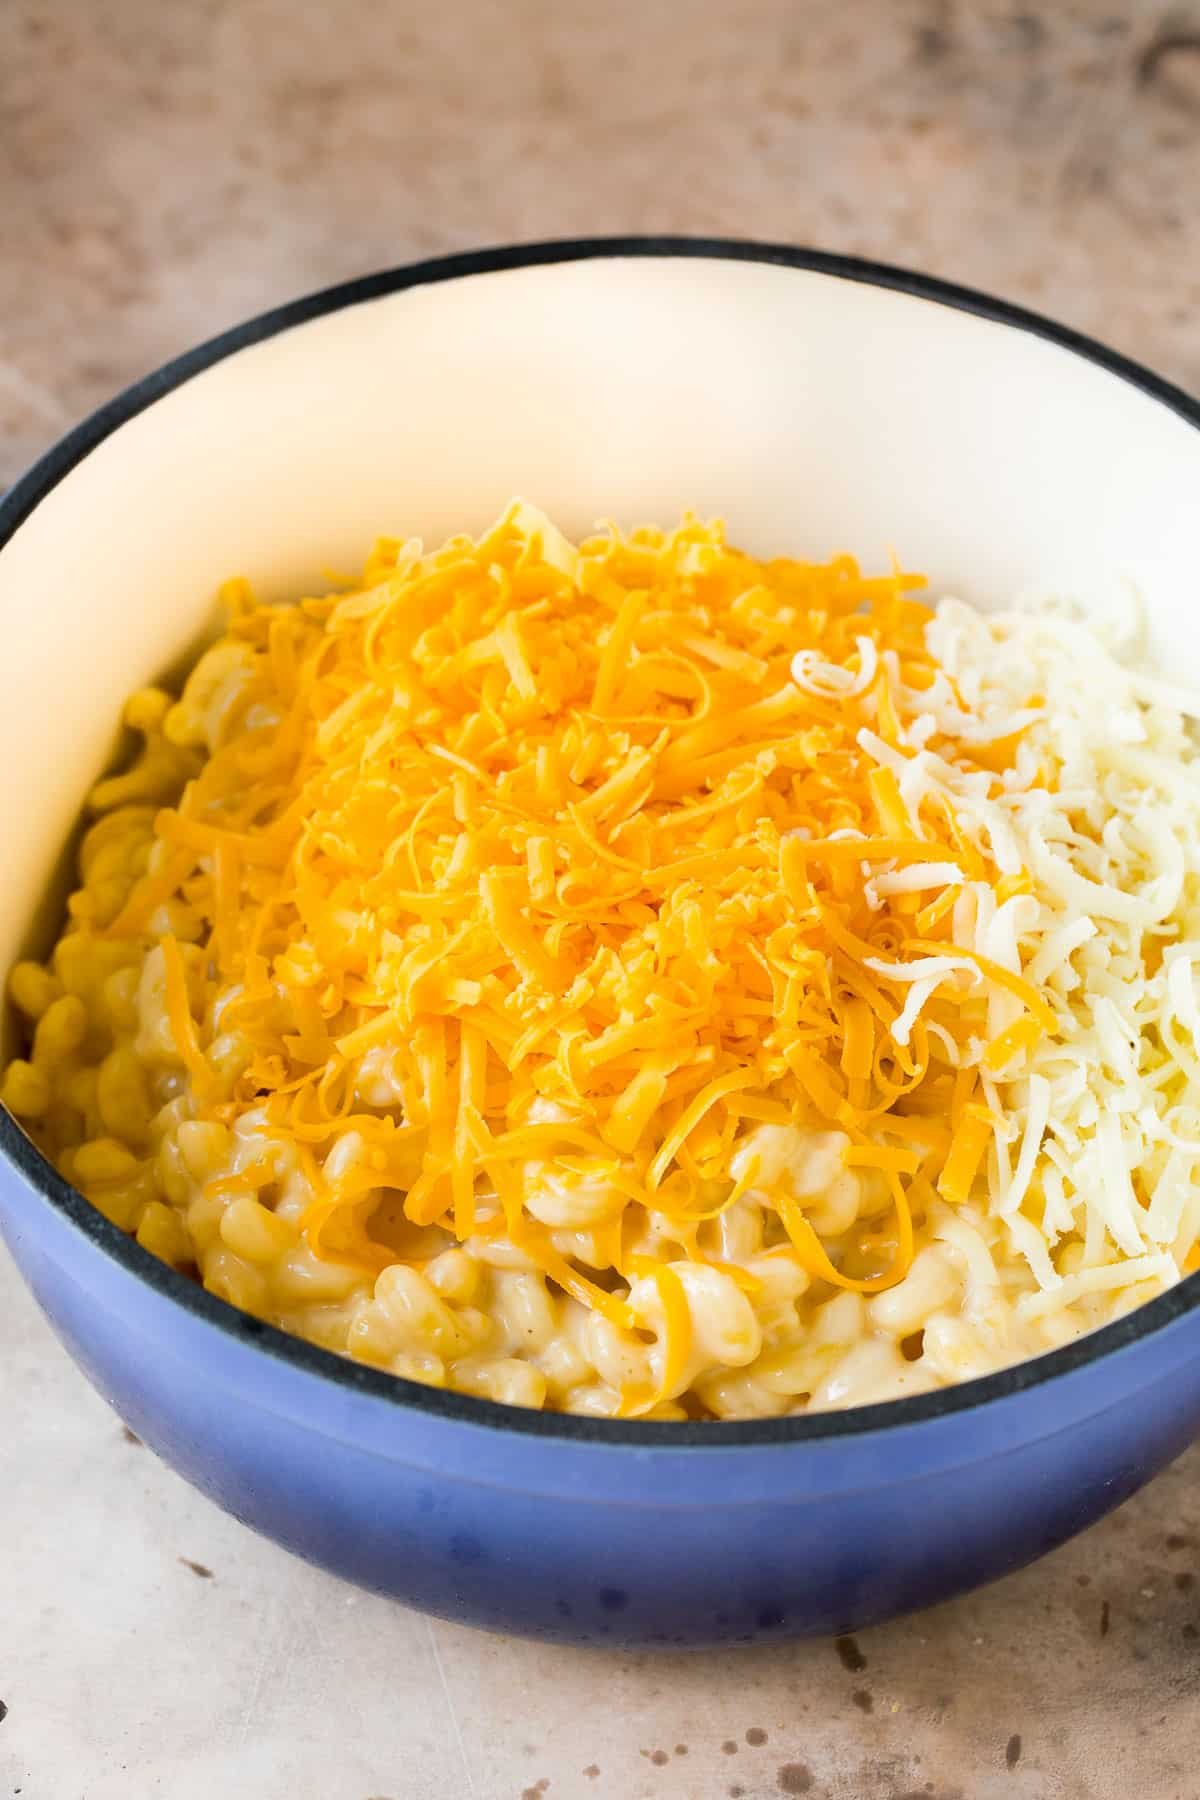 Cooked noodles with two types of shredded cheese on top.